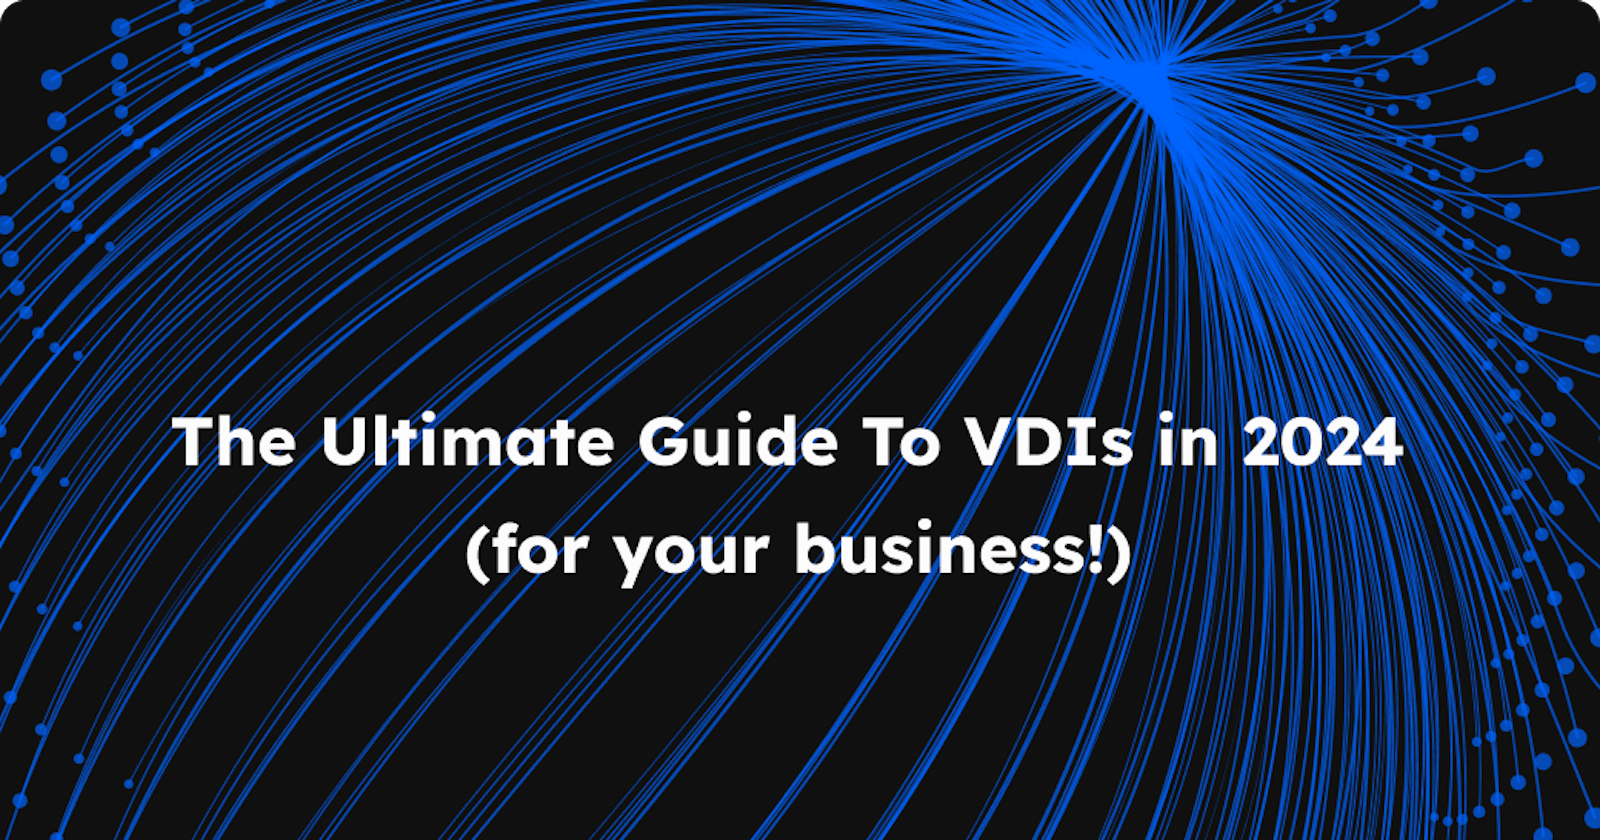 The Ultimate Guide to VDI for Forward-Thinking Companies